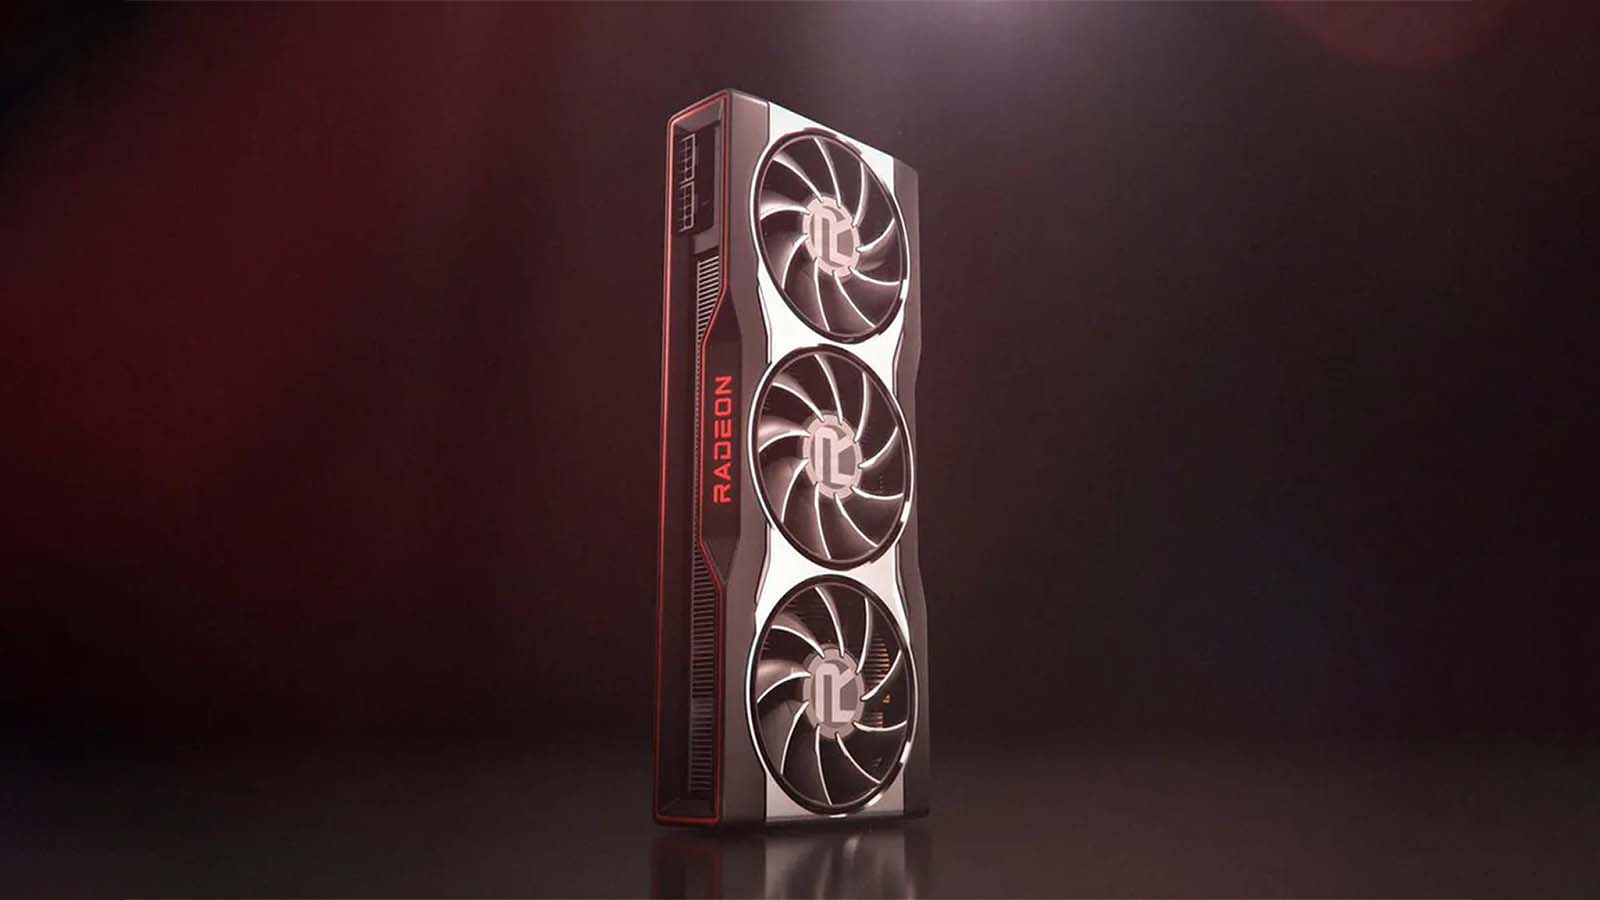 An AMD Radeon graphics card with three fans standing against a dark red background